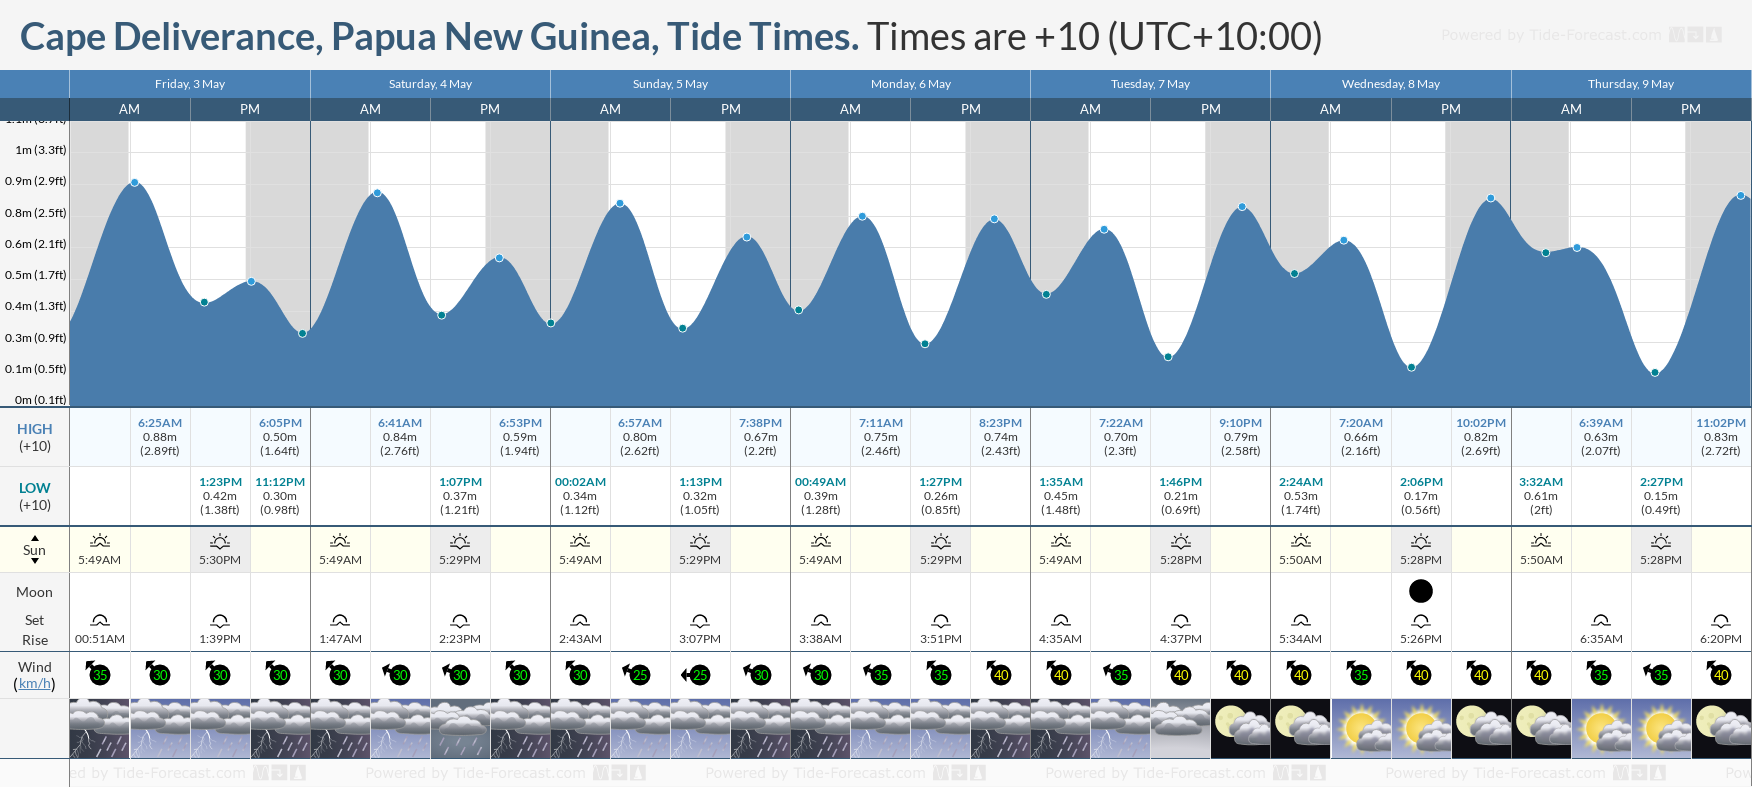 Cape Deliverance, Papua New Guinea Tide Chart including high and low tide tide times for the next 7 days